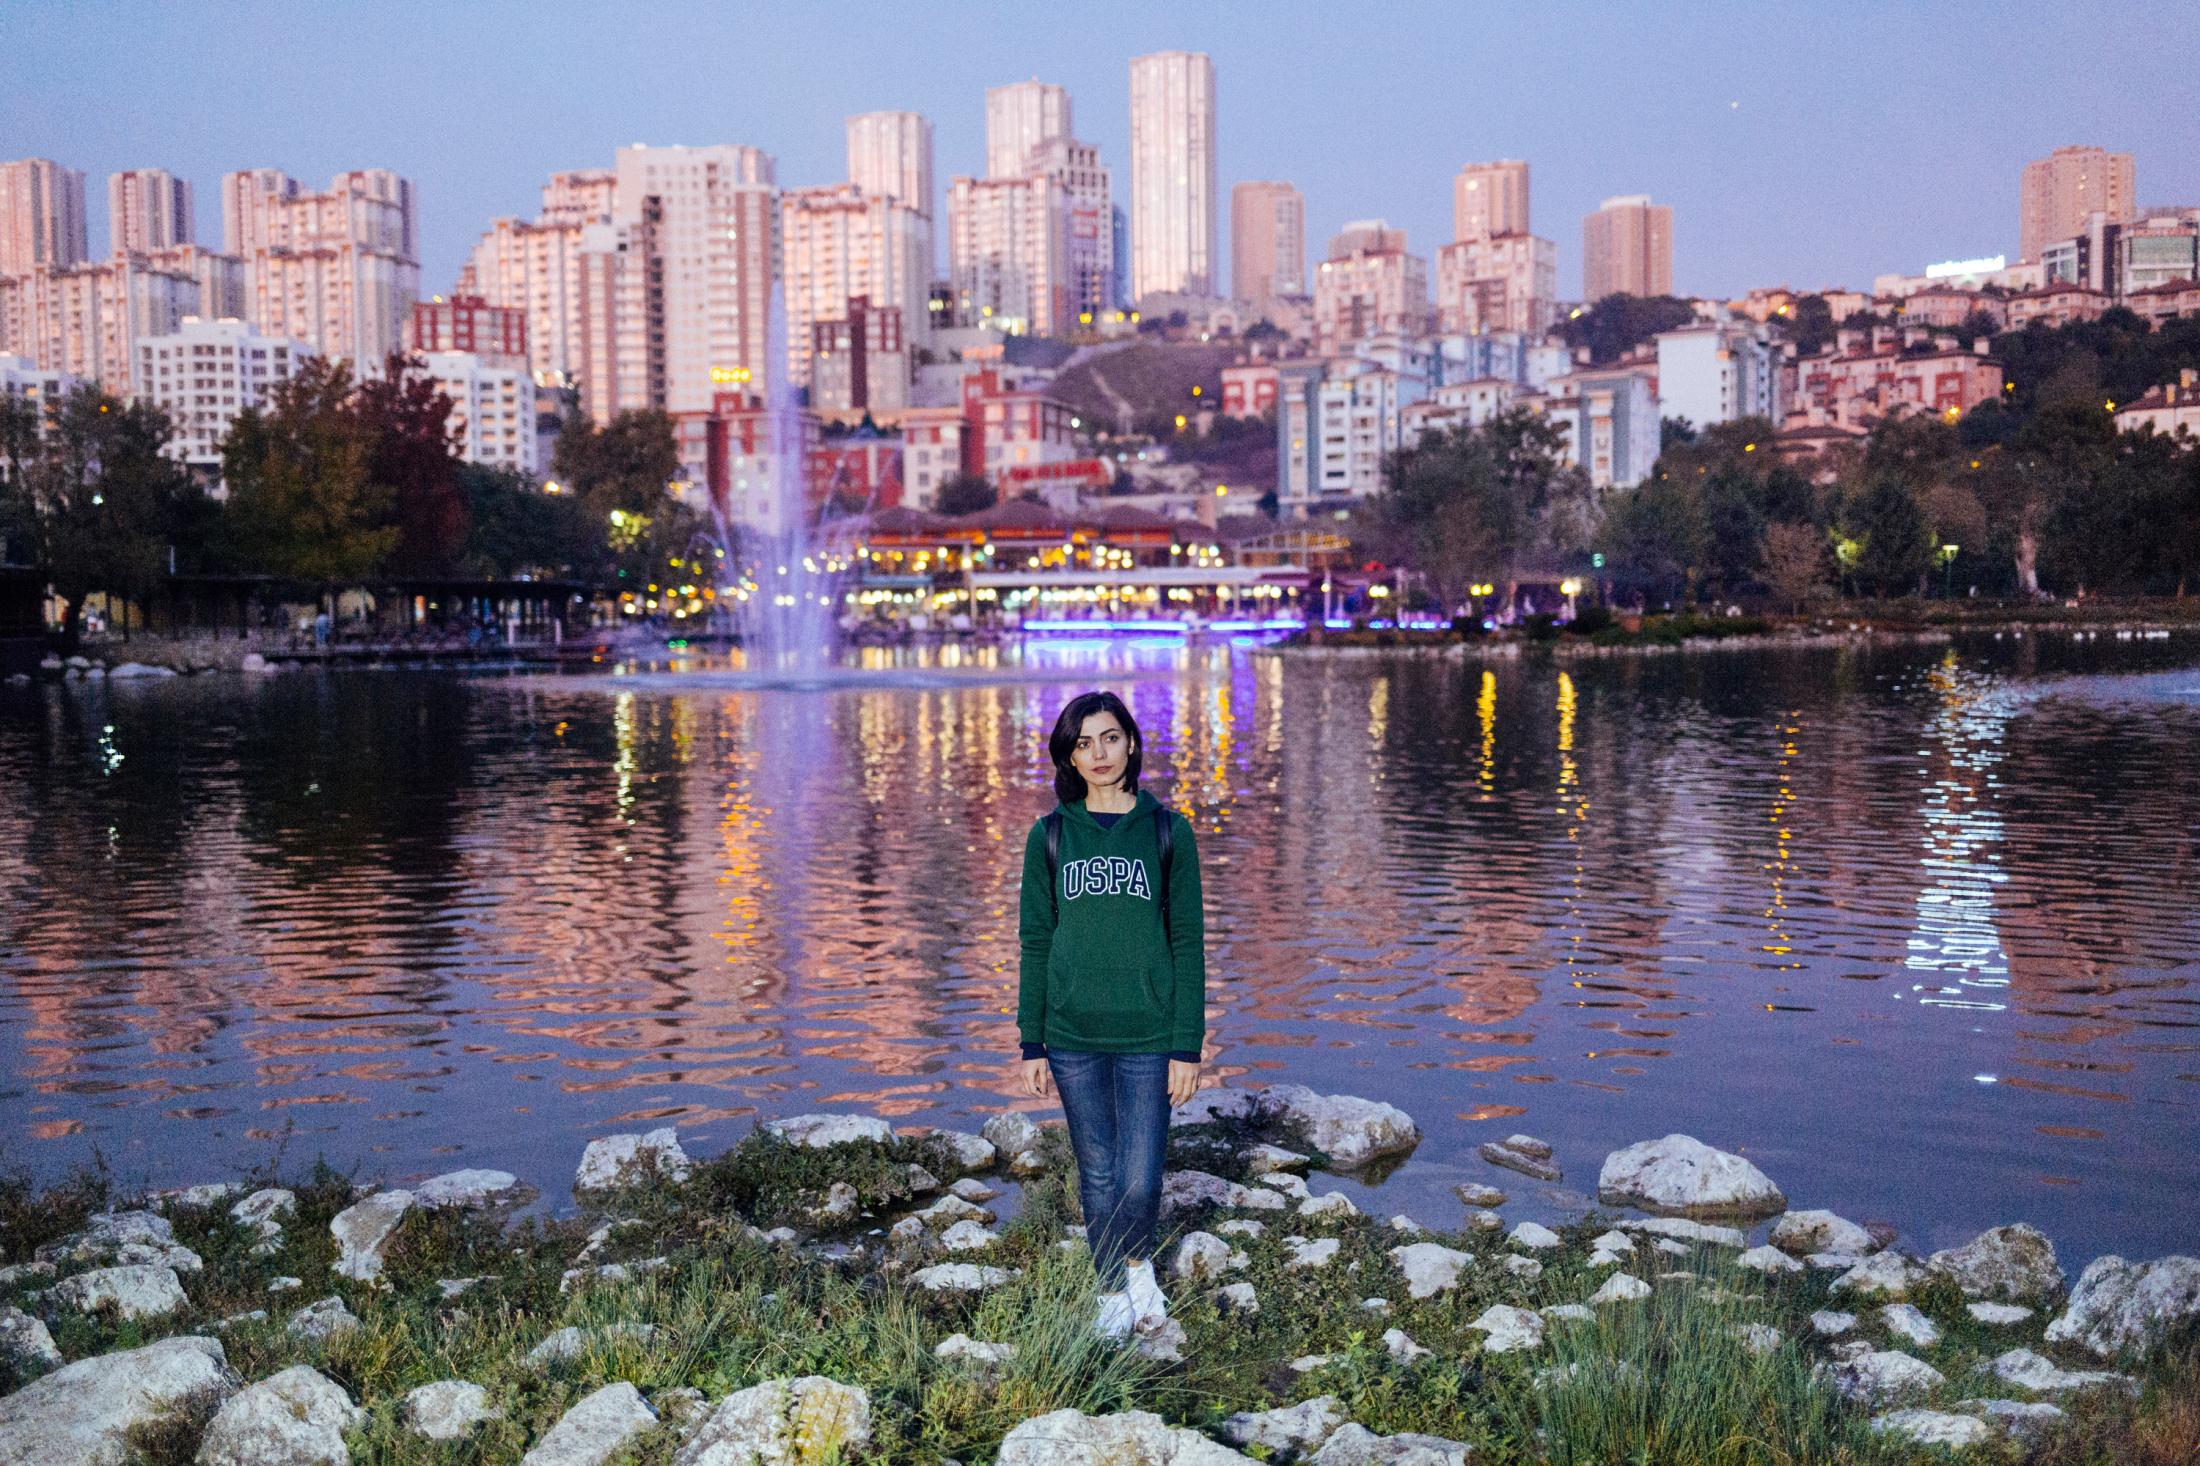 The Pursuit of Happiness -  Helen (30), stands by the water in front of a cityscape....